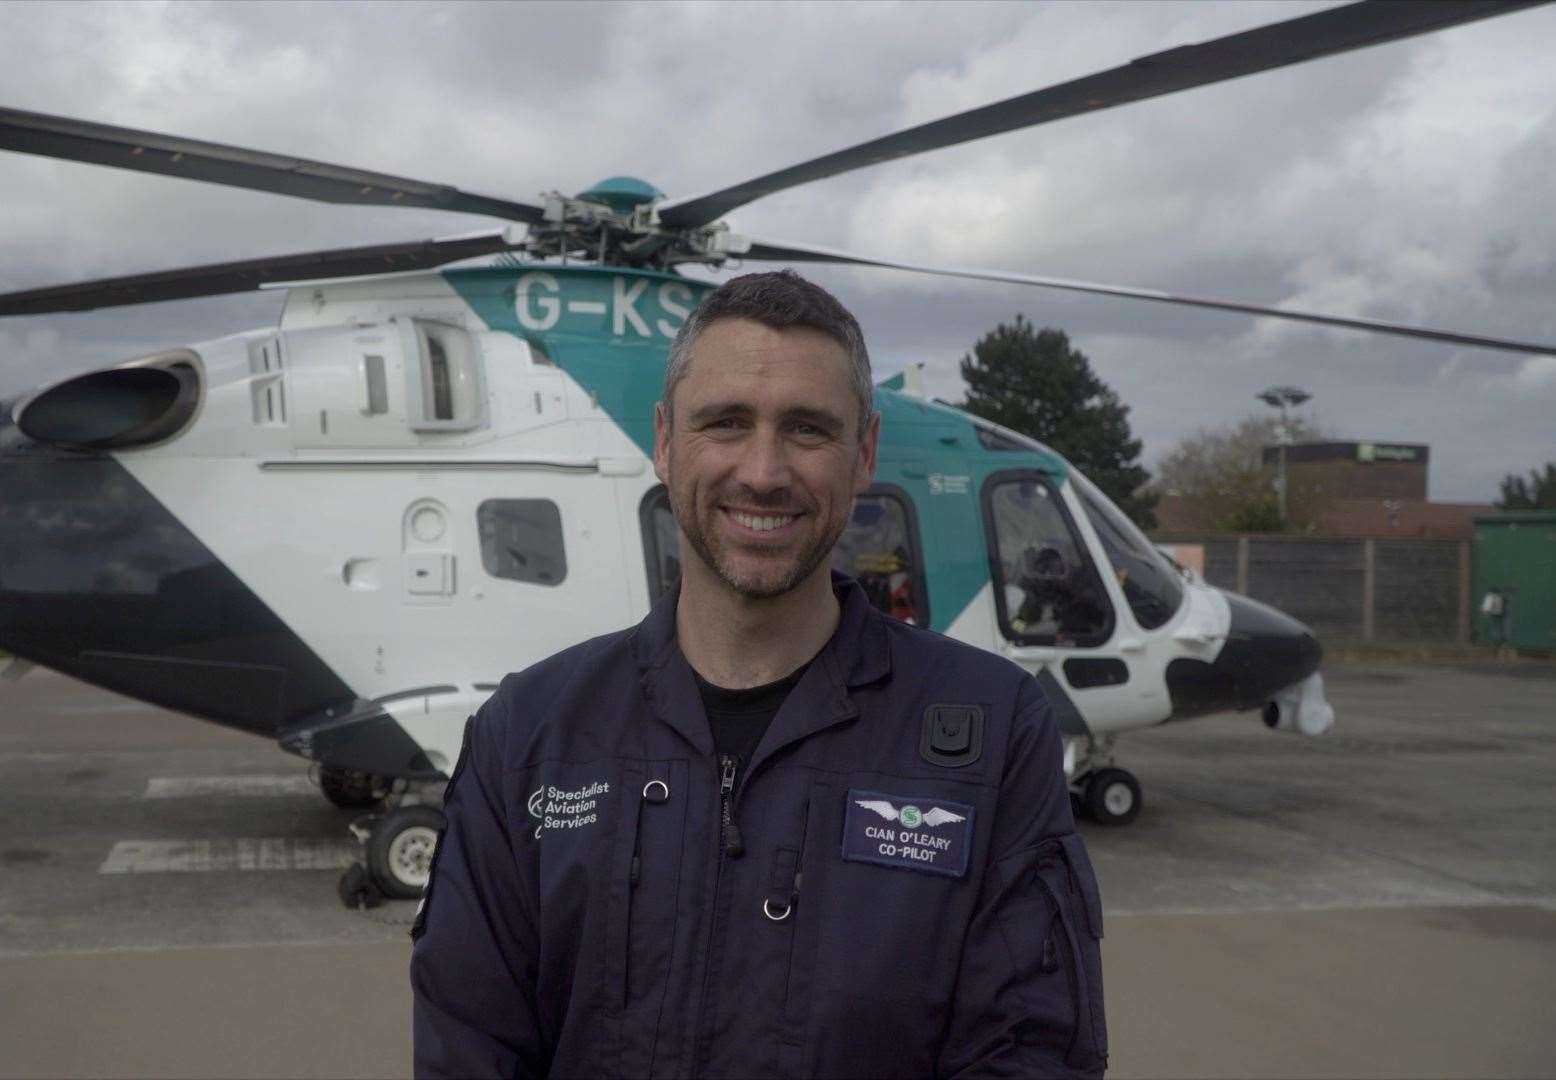 Co-pilot Cian O'Leary is responsible for making sure the helicopter gets to the patient quickly